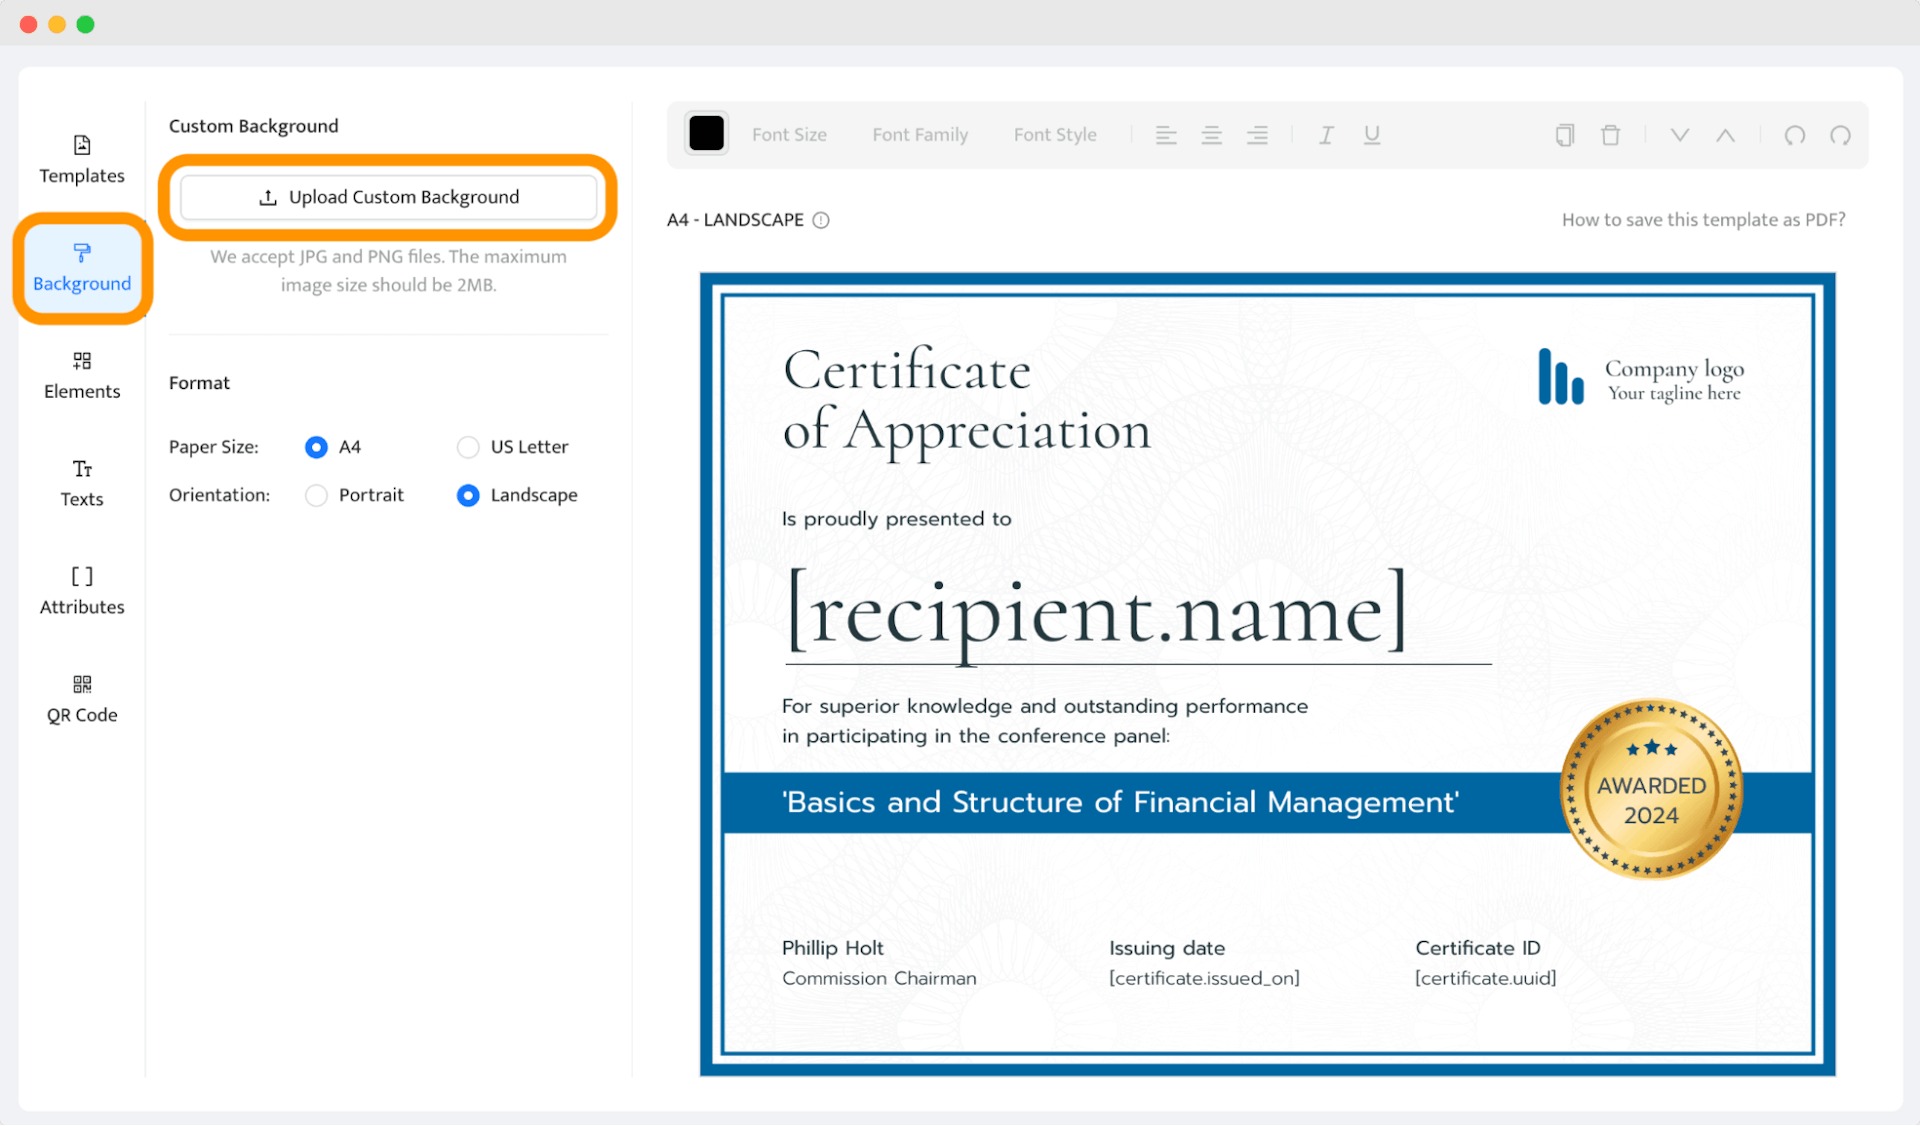 Uploading custom background to make personalized certificate of appreciation.